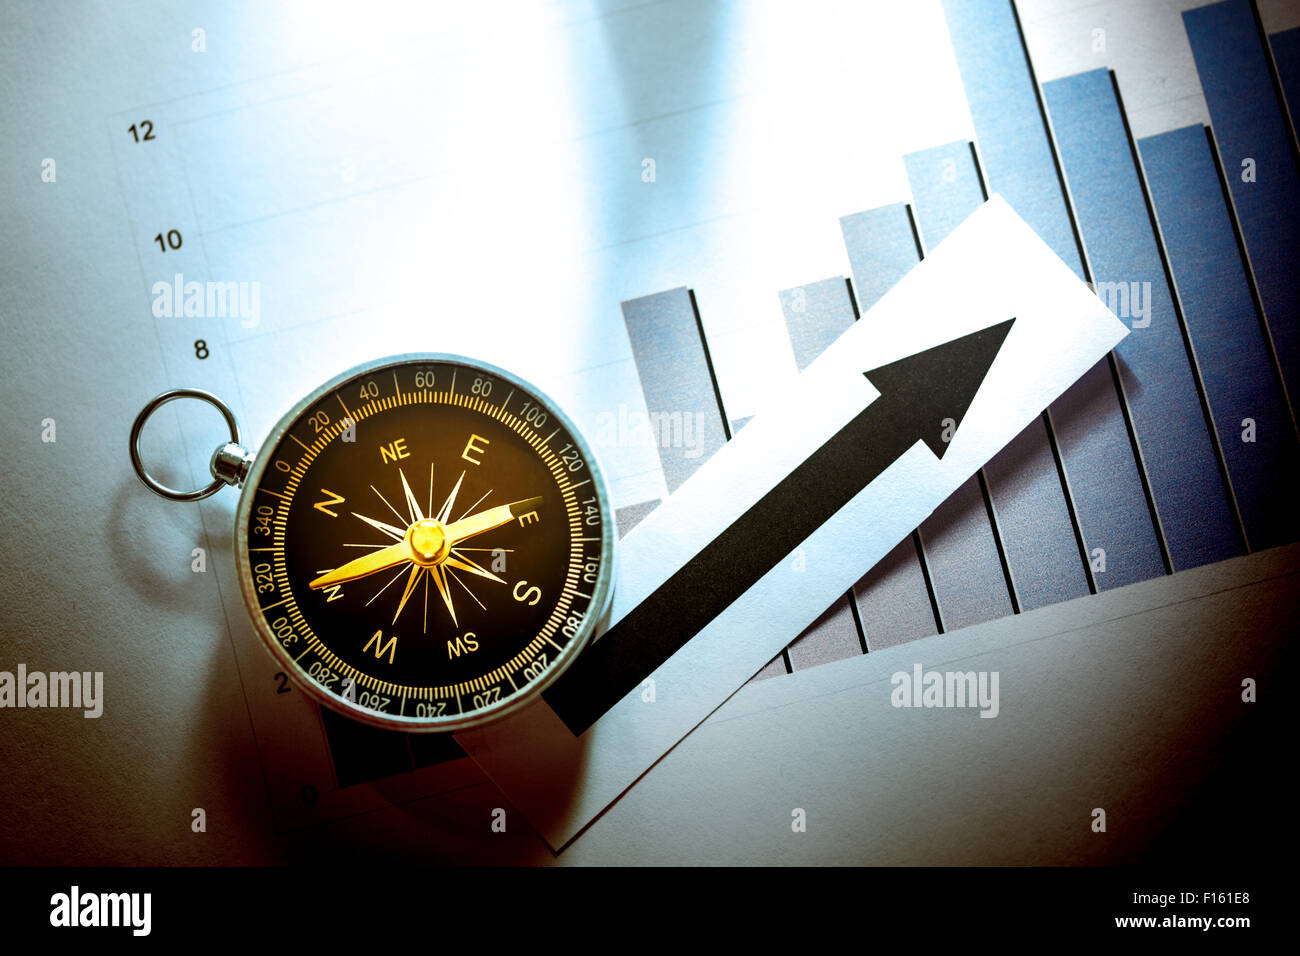 Diagram concept with compass and arrow in light Stock Photo